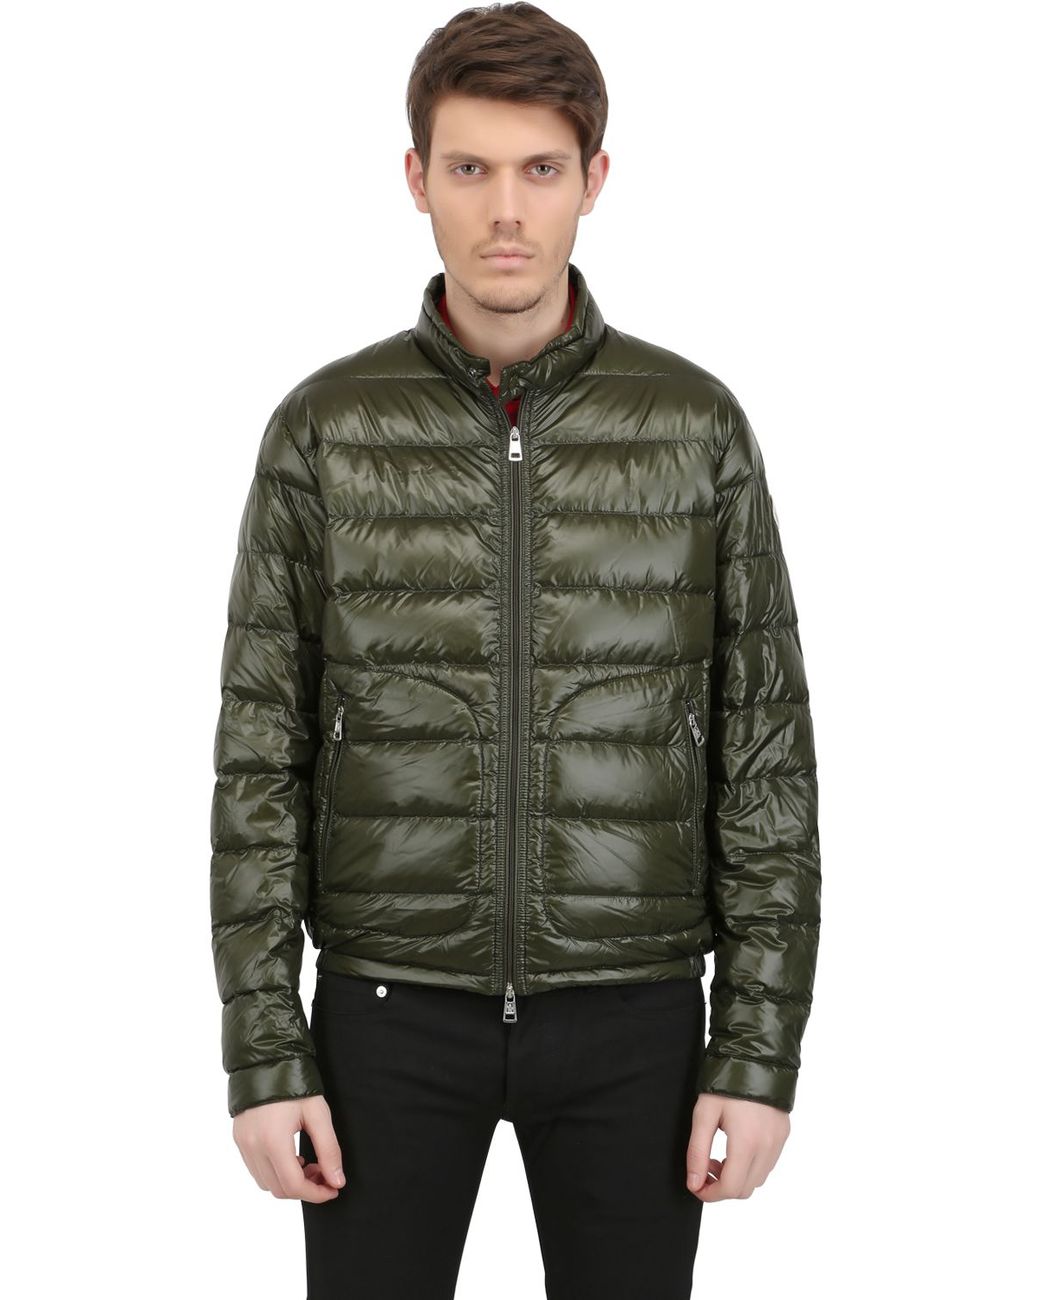 Moncler Acorus Nylon Light Weight Down Jacket in Military Green (Green ...